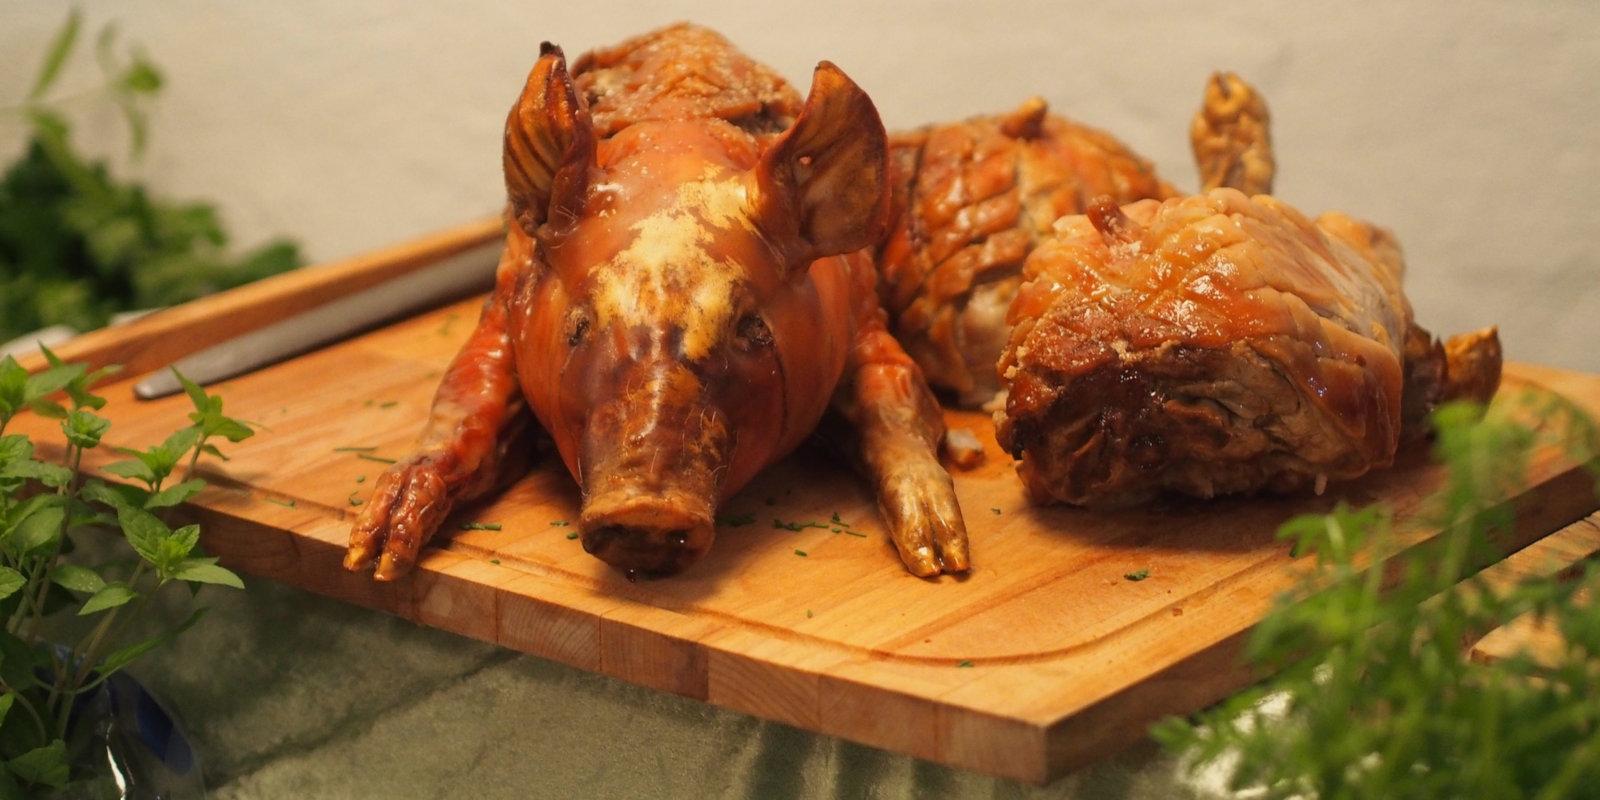 Lechon is a delicious meal from the Philippines where a suckling pig is roasted over coals